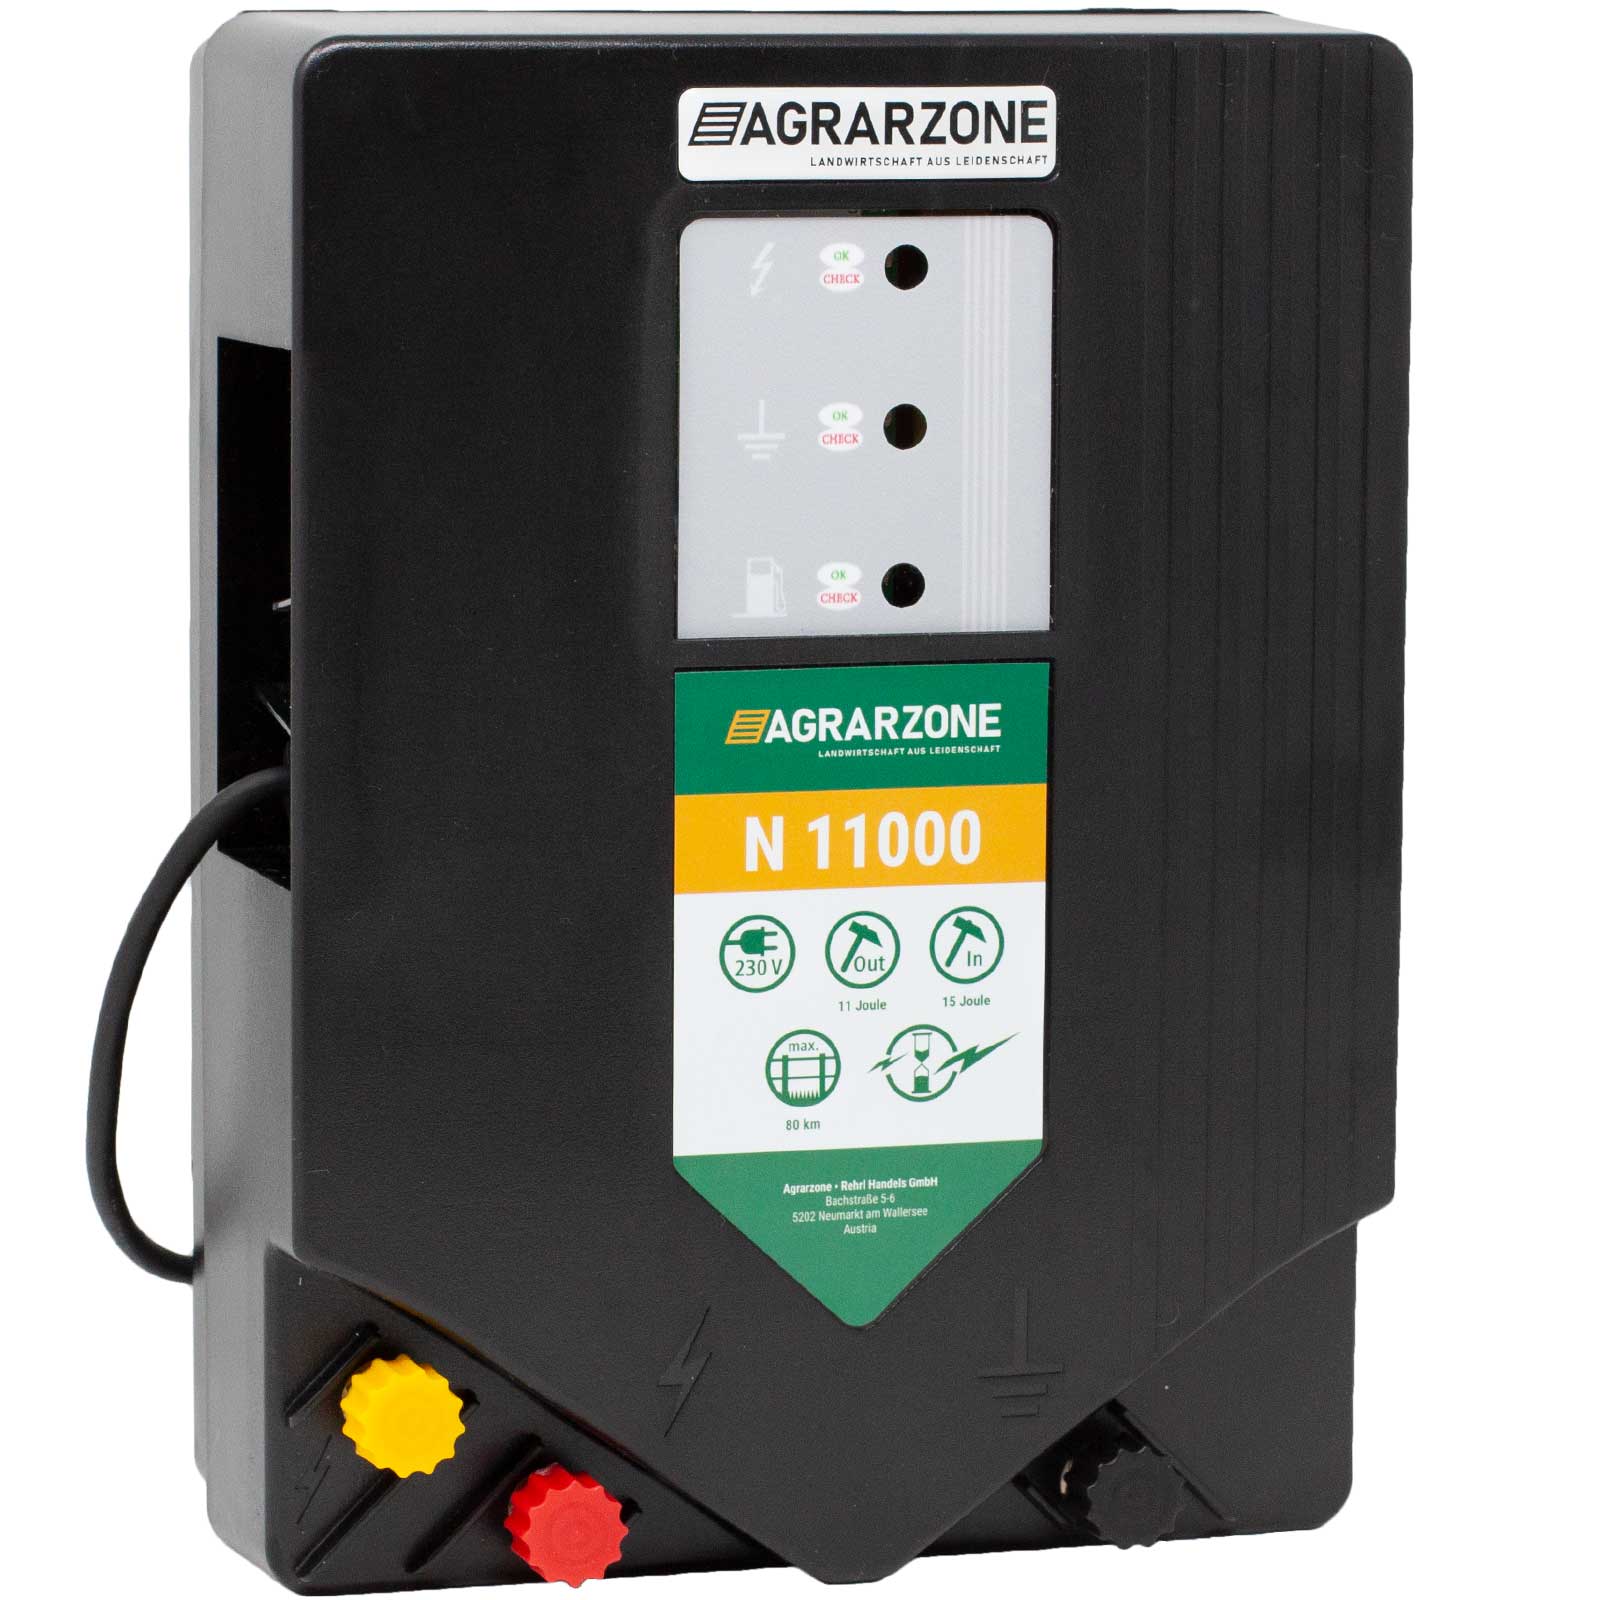 Agrarzone N 11000 electric fence energiser 230V, 15 joules